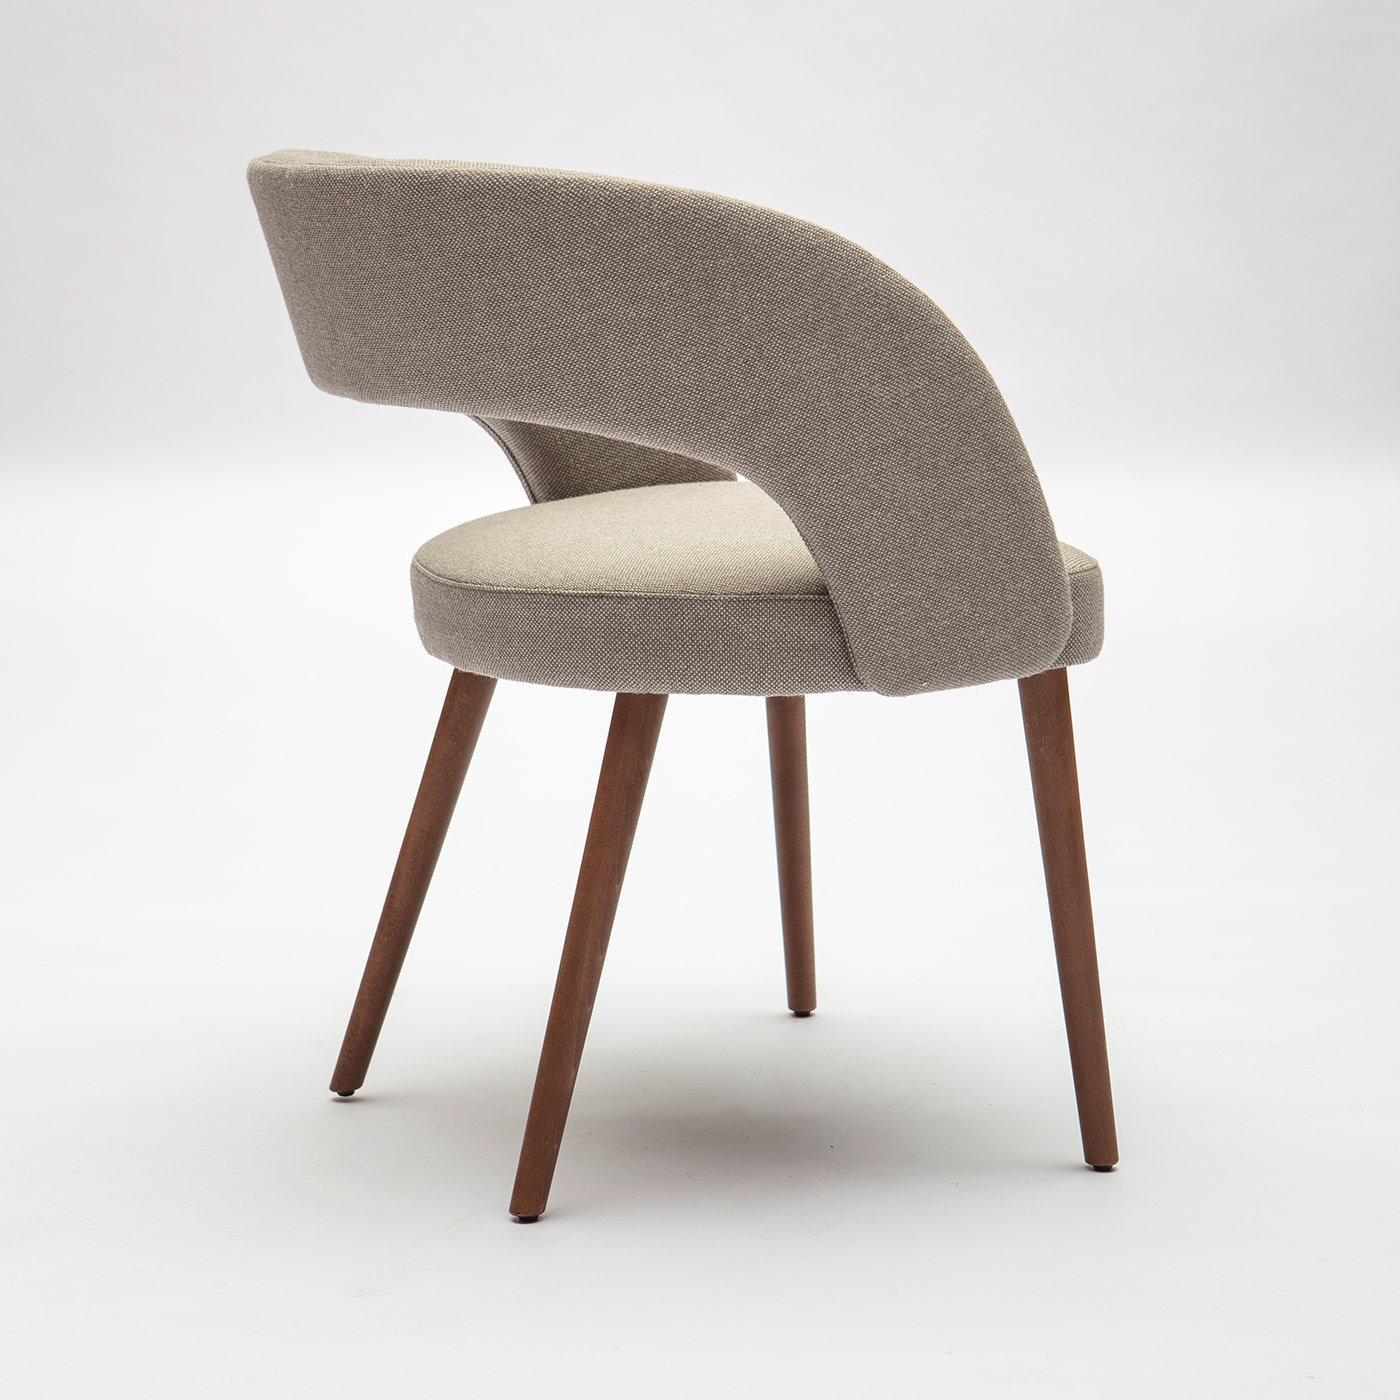 Combining retro shapes and contemporary finishes, the Ring chair oozes sophistication. In line with the midcentury modern resurgence, the chair rests on round, flared legs in solid beechwood. The seat back then wraps around the sides to provide an